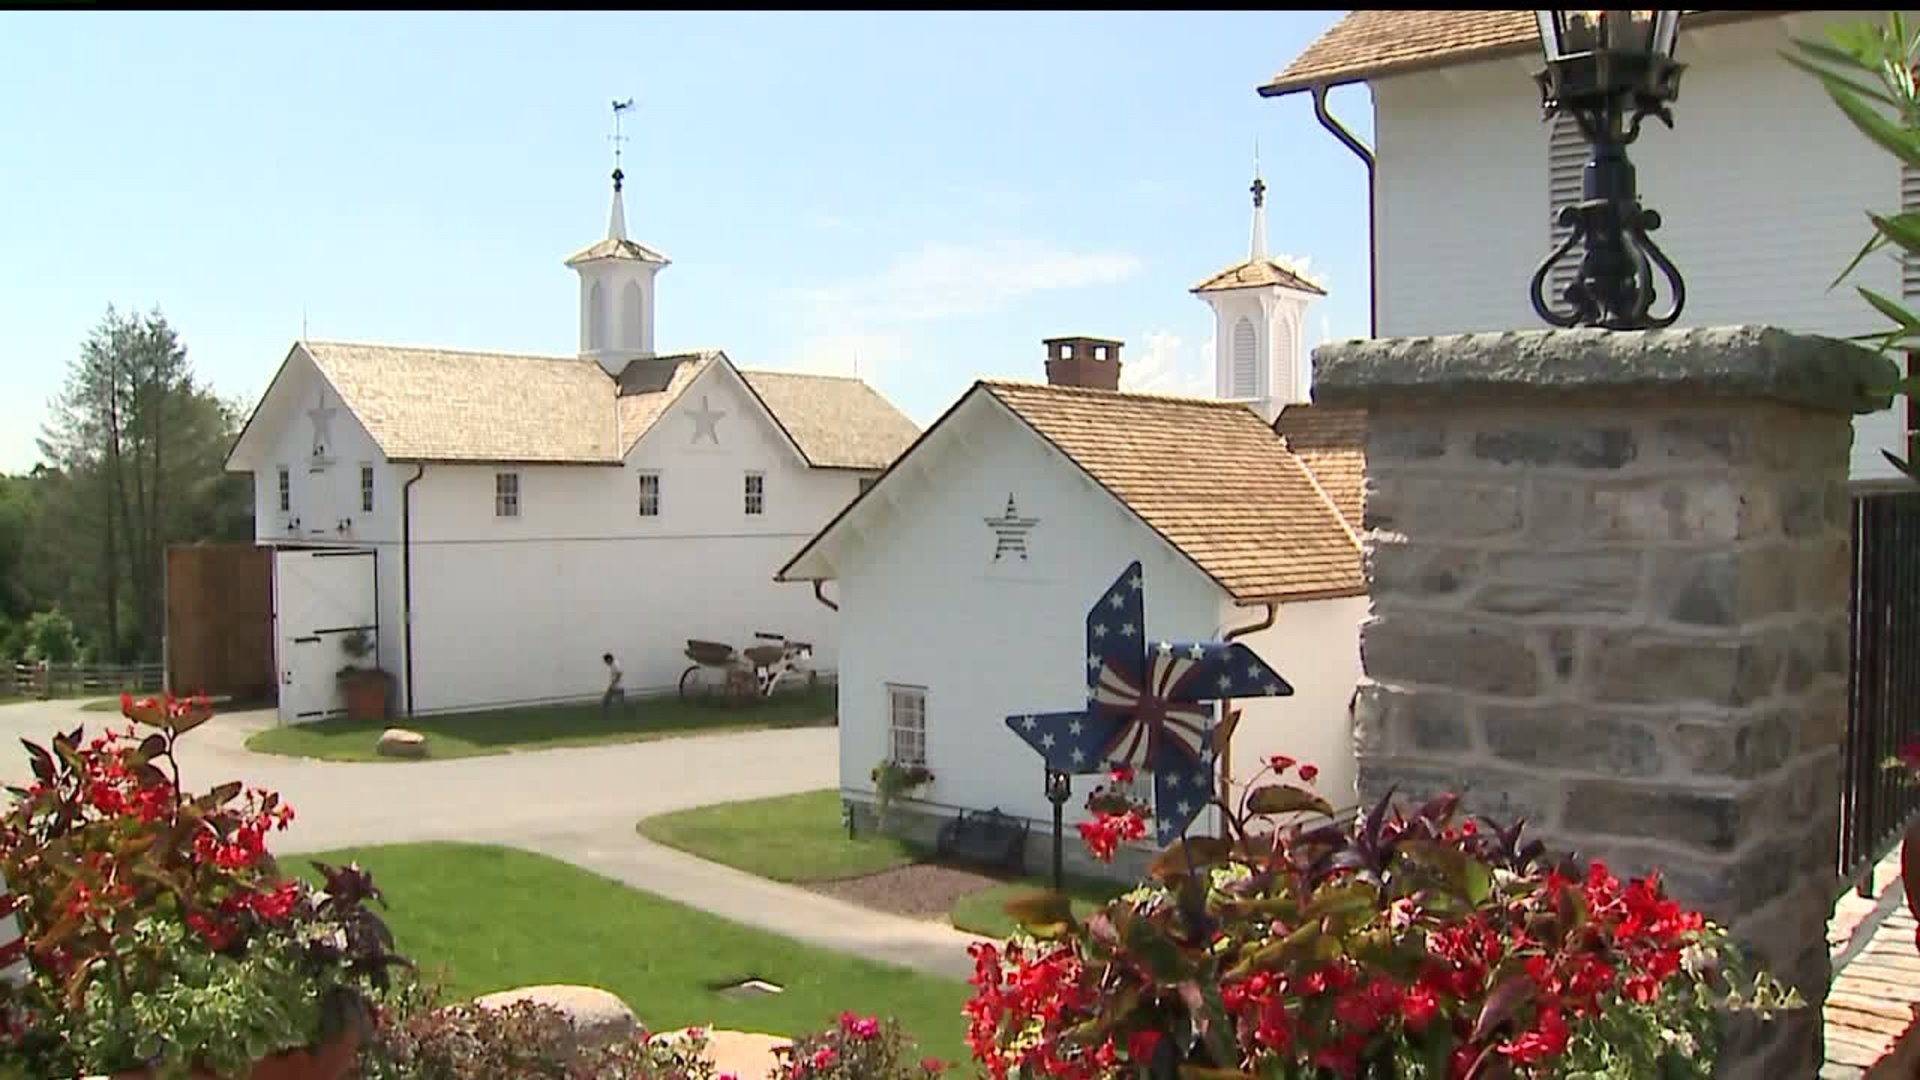 Star Barn owner speaks out on decision to prohibit gay weddings